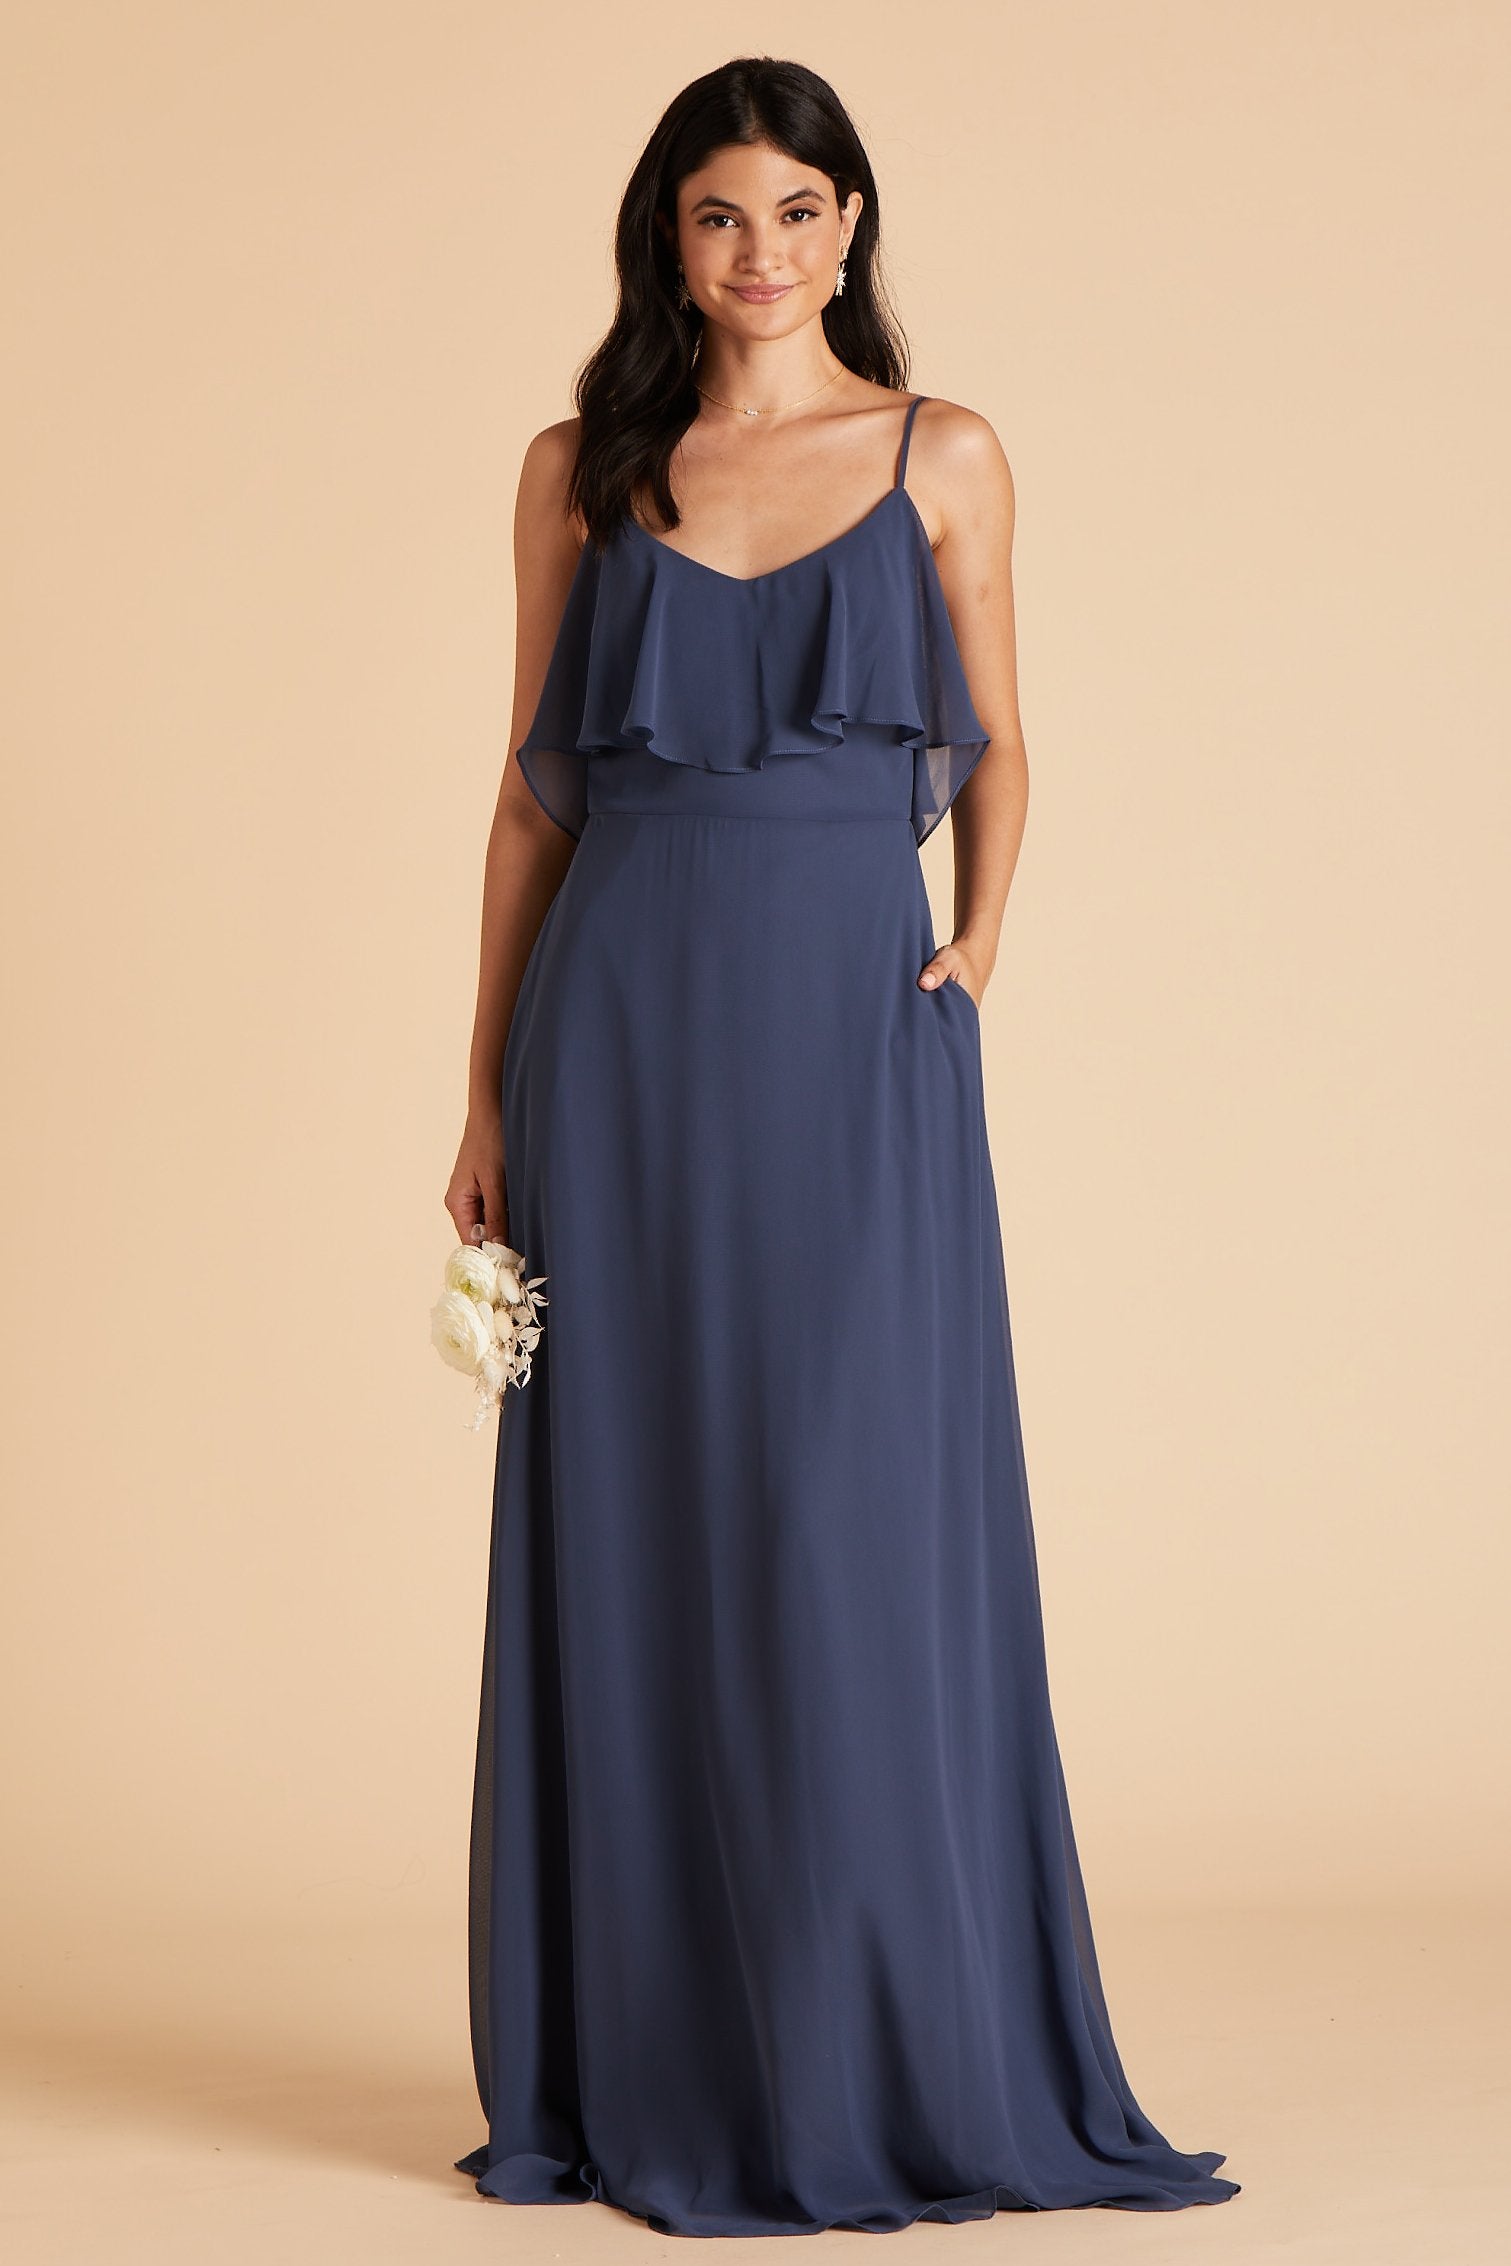 Jane convertible bridesmaid dress in slate blue chiffon by Birdy Grey, front view with hand in pocket